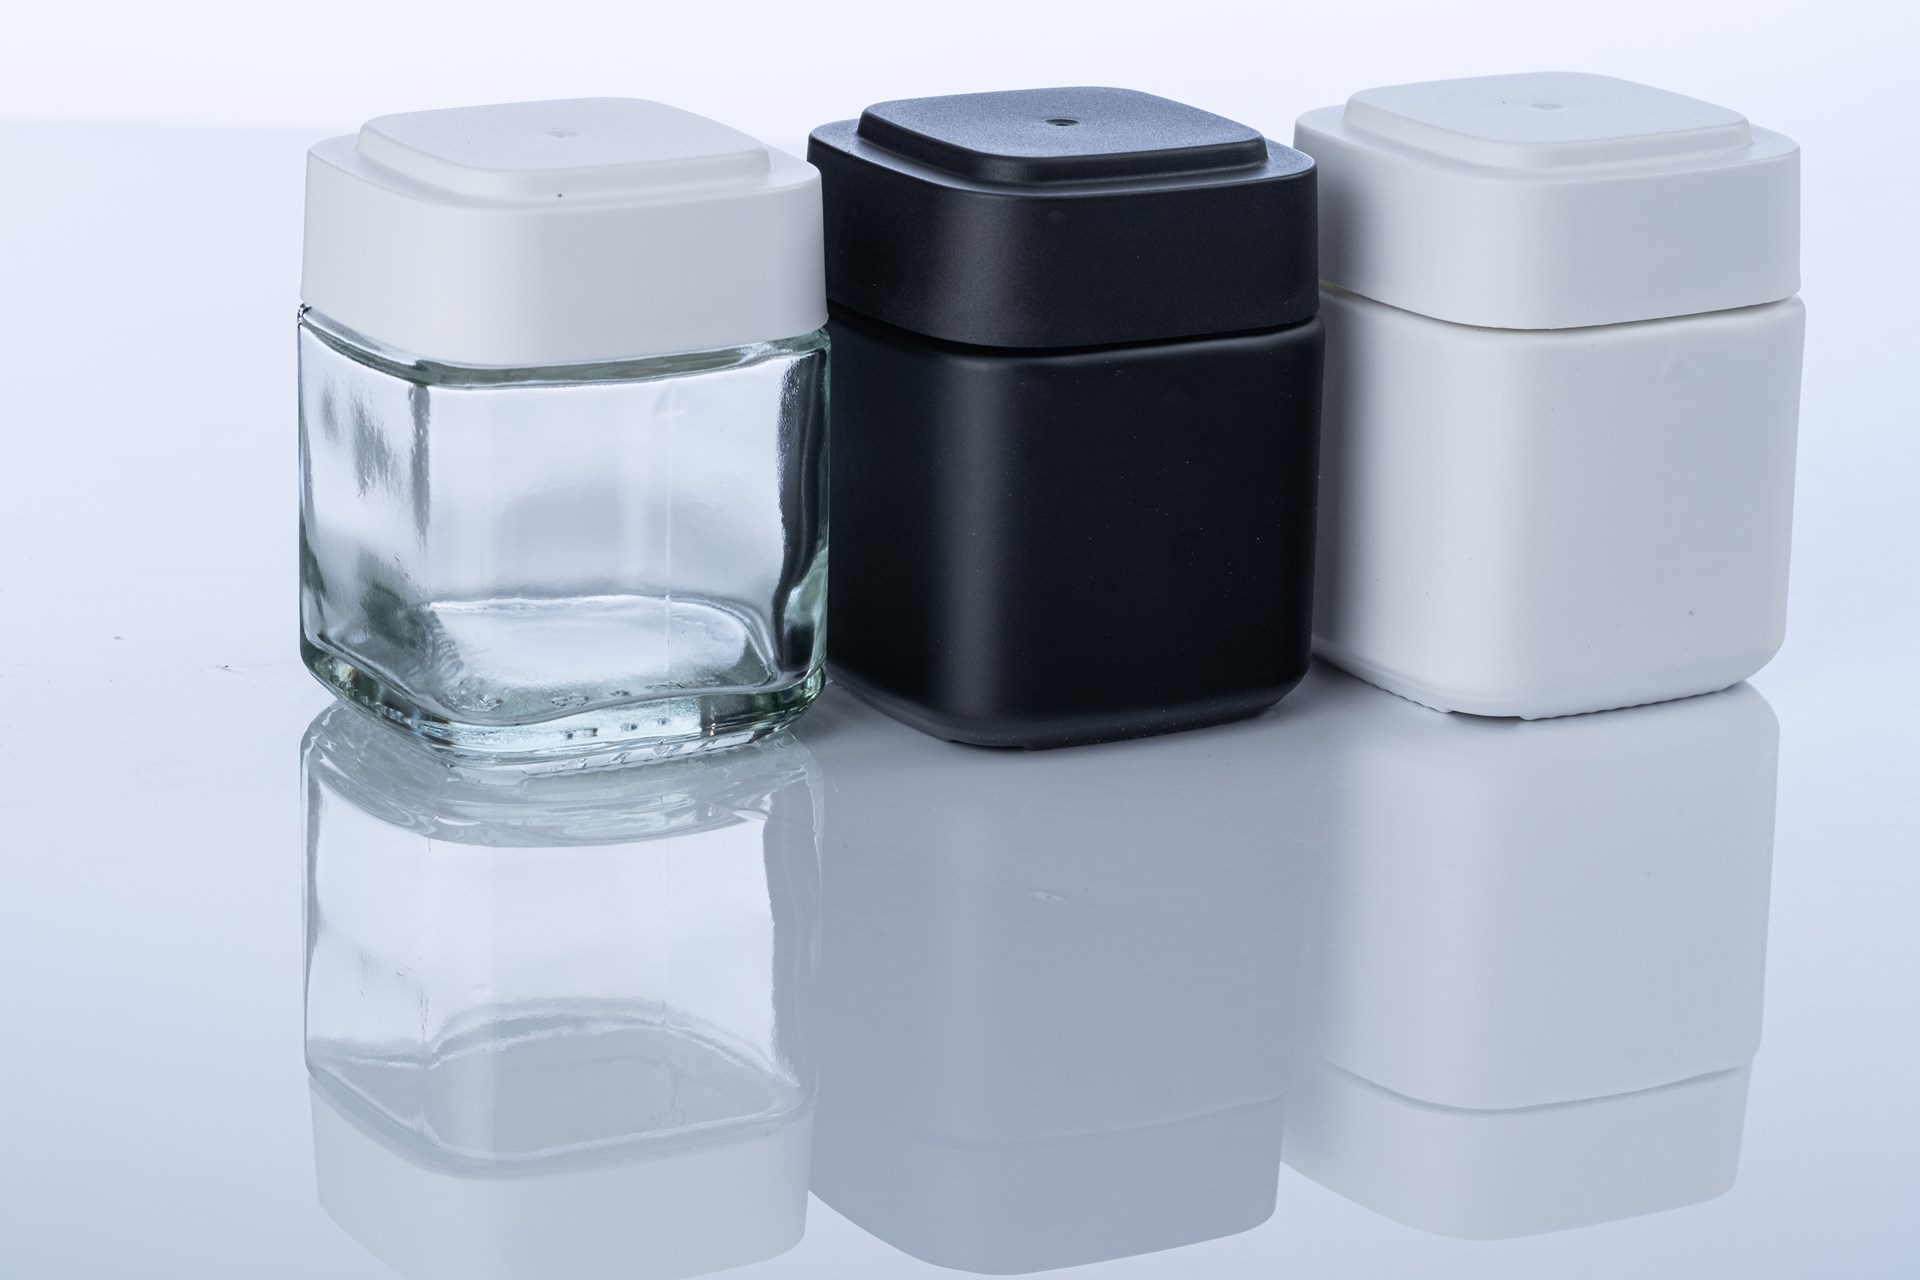  Calyx cannabis containers in black, white, and glass.